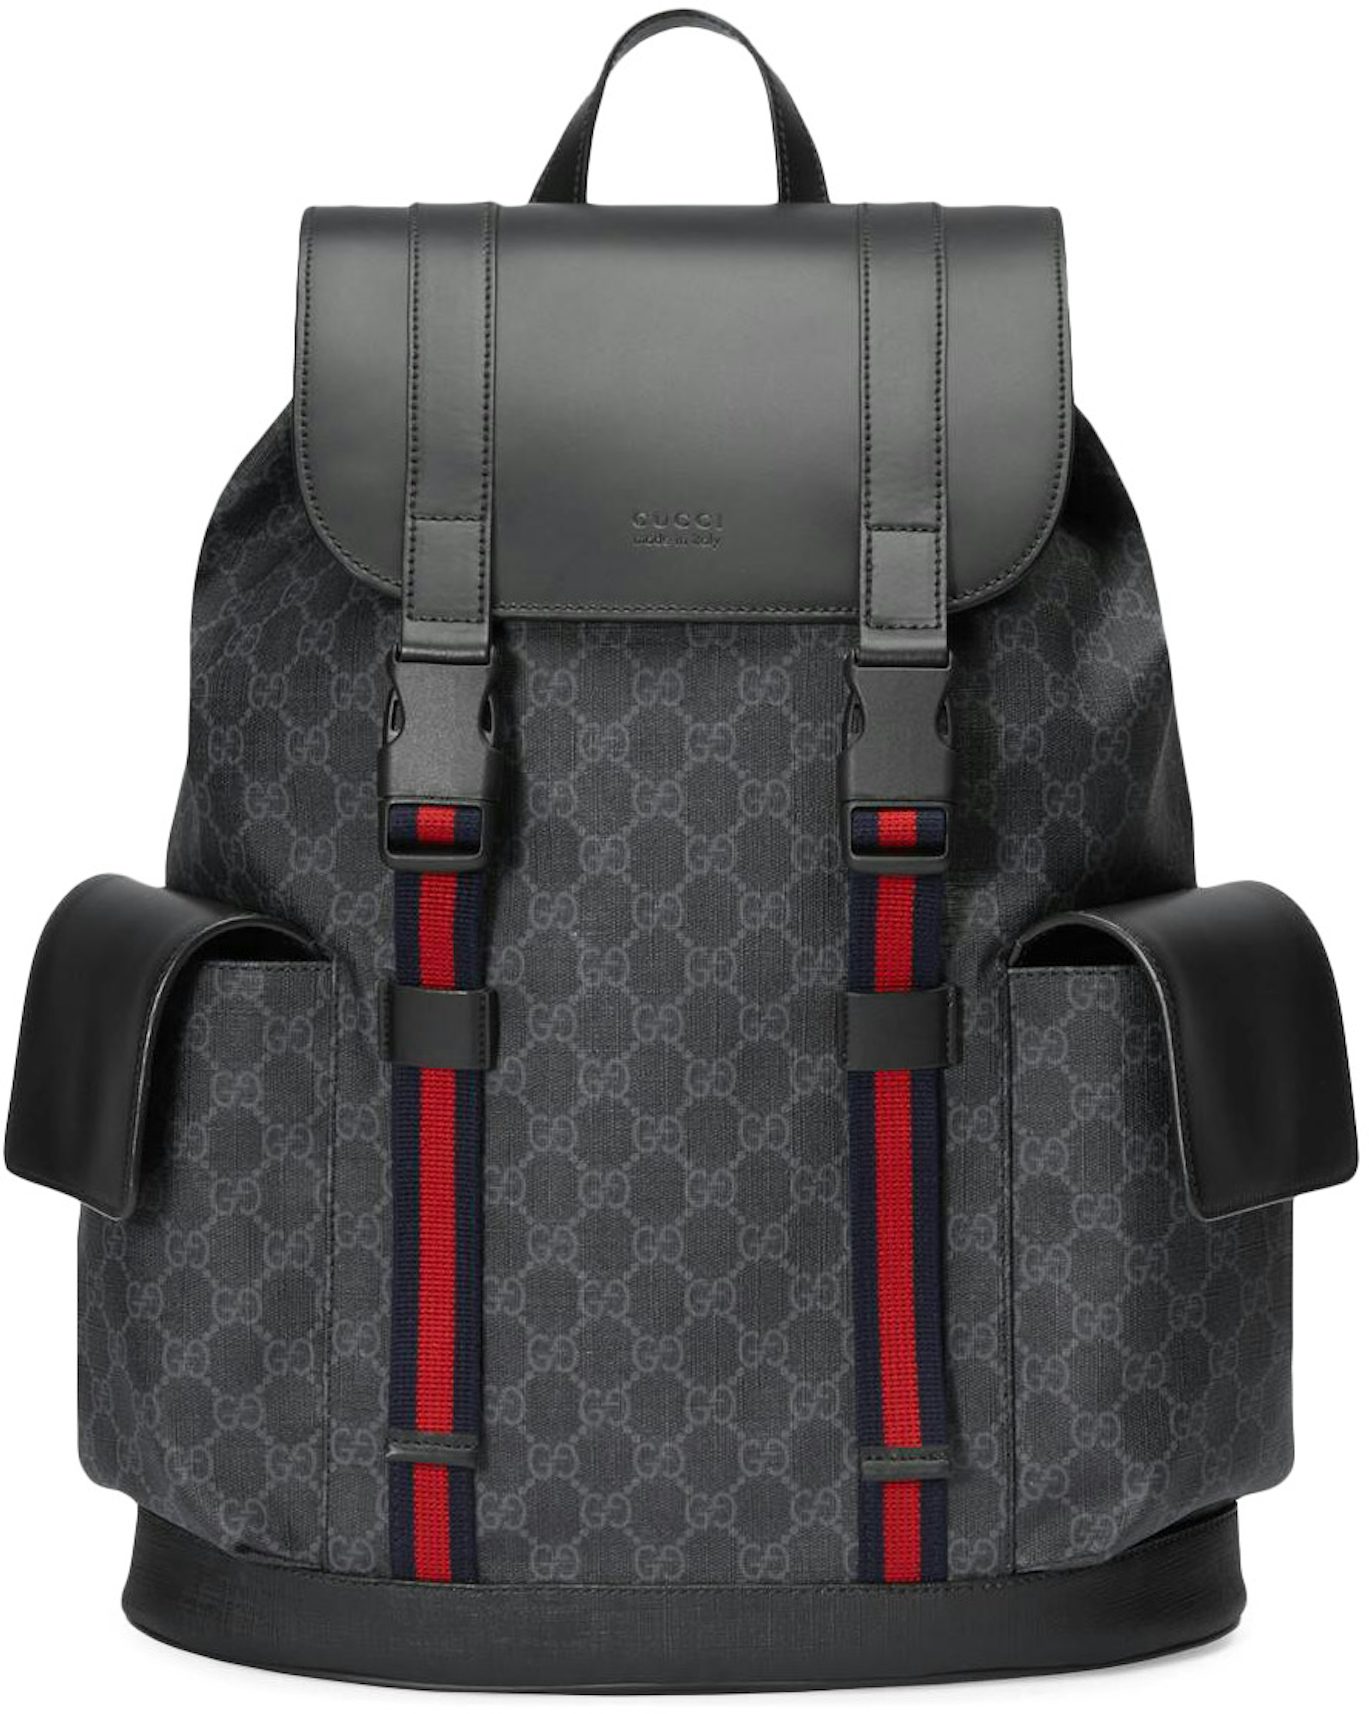 GUCCI GUCCI GG Supreme Backpack Rucksack 406370 Canvas Beige Black Used  unisex 406370｜Product Code：2101217437813｜BRAND OFF Online Store